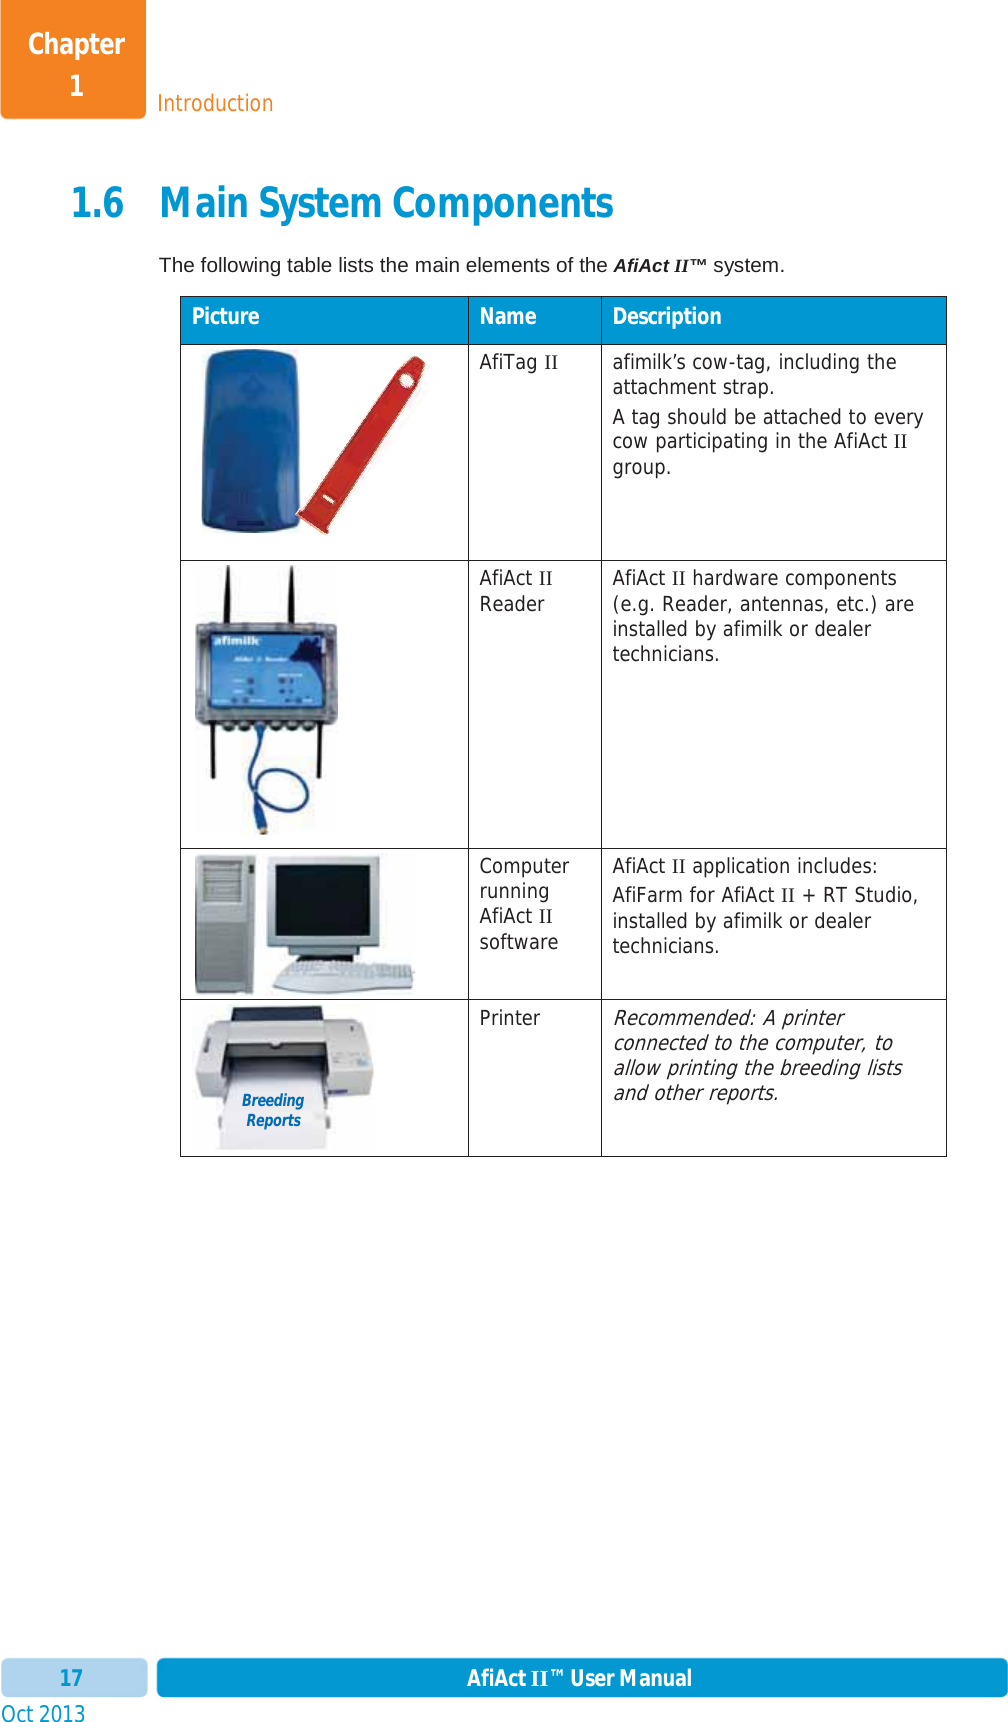 Oct 2013 AfiAct II™ User Manual17IntroductionChapter 11.6 Main System Components The following table lists the main elements of the AfiAct II™system. Picture  Name  Description AfiTag II afimilk’s cow-tag, including the attachment strap. A tag should be attached to every cow participating in the AfiAct IIgroup. AfiAct IIReader  AfiAct II hardware components (e.g. Reader, antennas, etc.) are installed by afimilk or dealer technicians. Computerrunning AfiAct IIsoftware AfiAct II application includes: AfiFarm for AfiAct II + RT Studio, installed by afimilk or dealer technicians.  Printer Recommended: A printer connected to the computer, to allow printing the breeding lists and other reports. BreedingReports